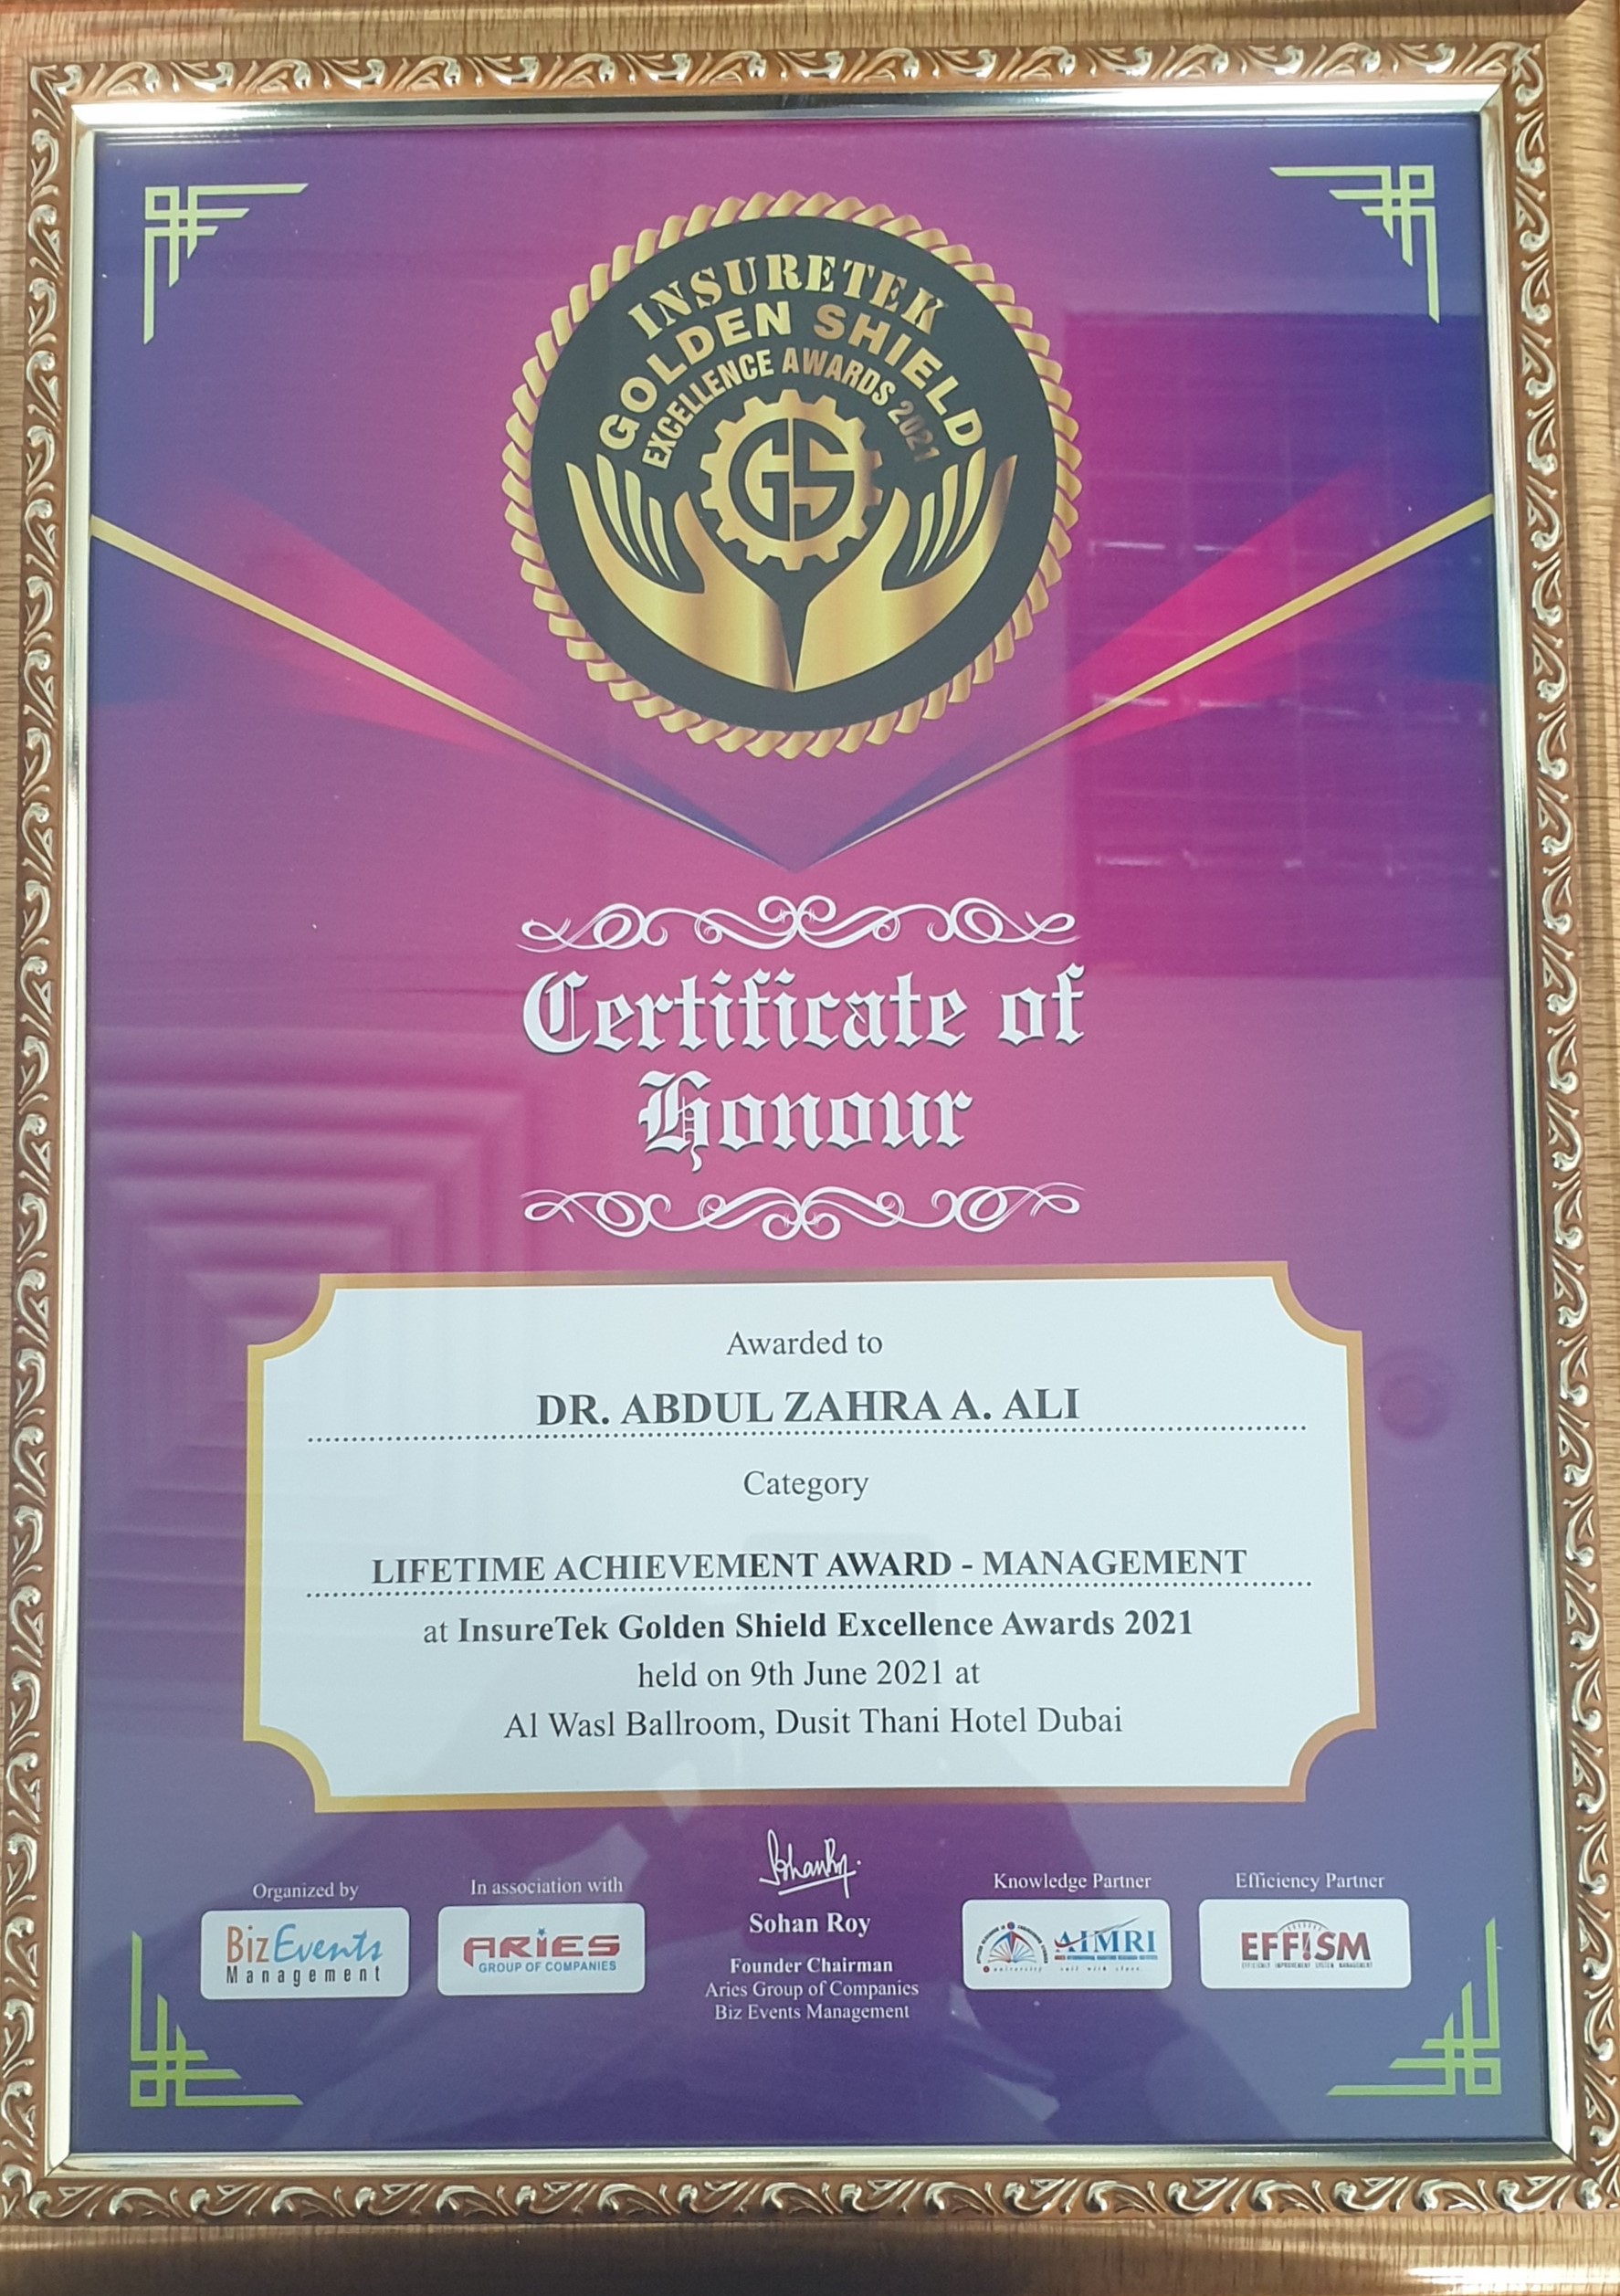 CEO Dr. Abdul Zahra A. Ali honored with the Lifetime Achievement Award - Management